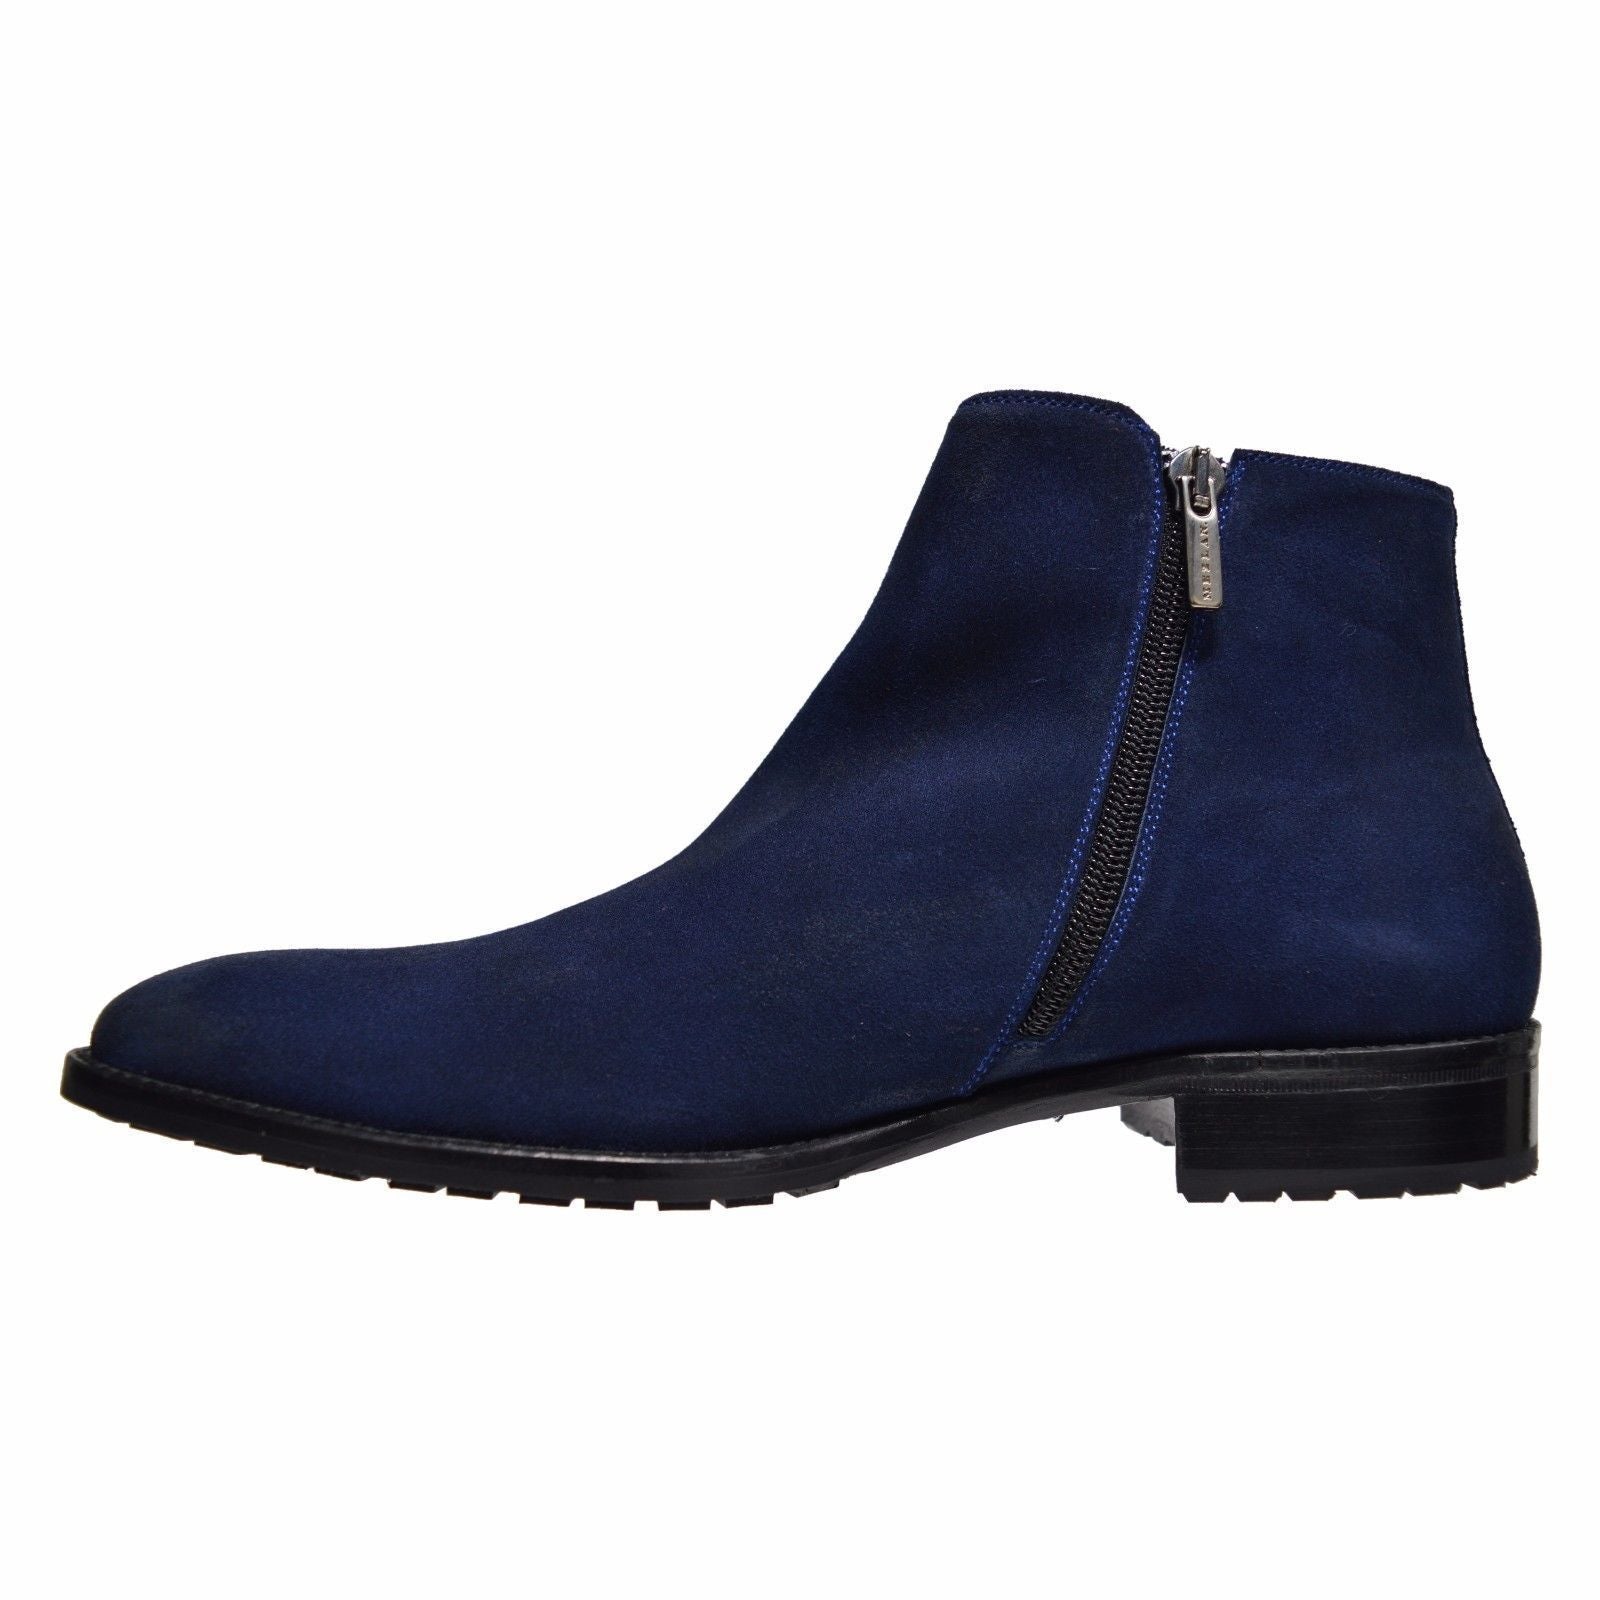 New Handmade Men's Leather Blue Suede Zip Up Boots theleathersouq